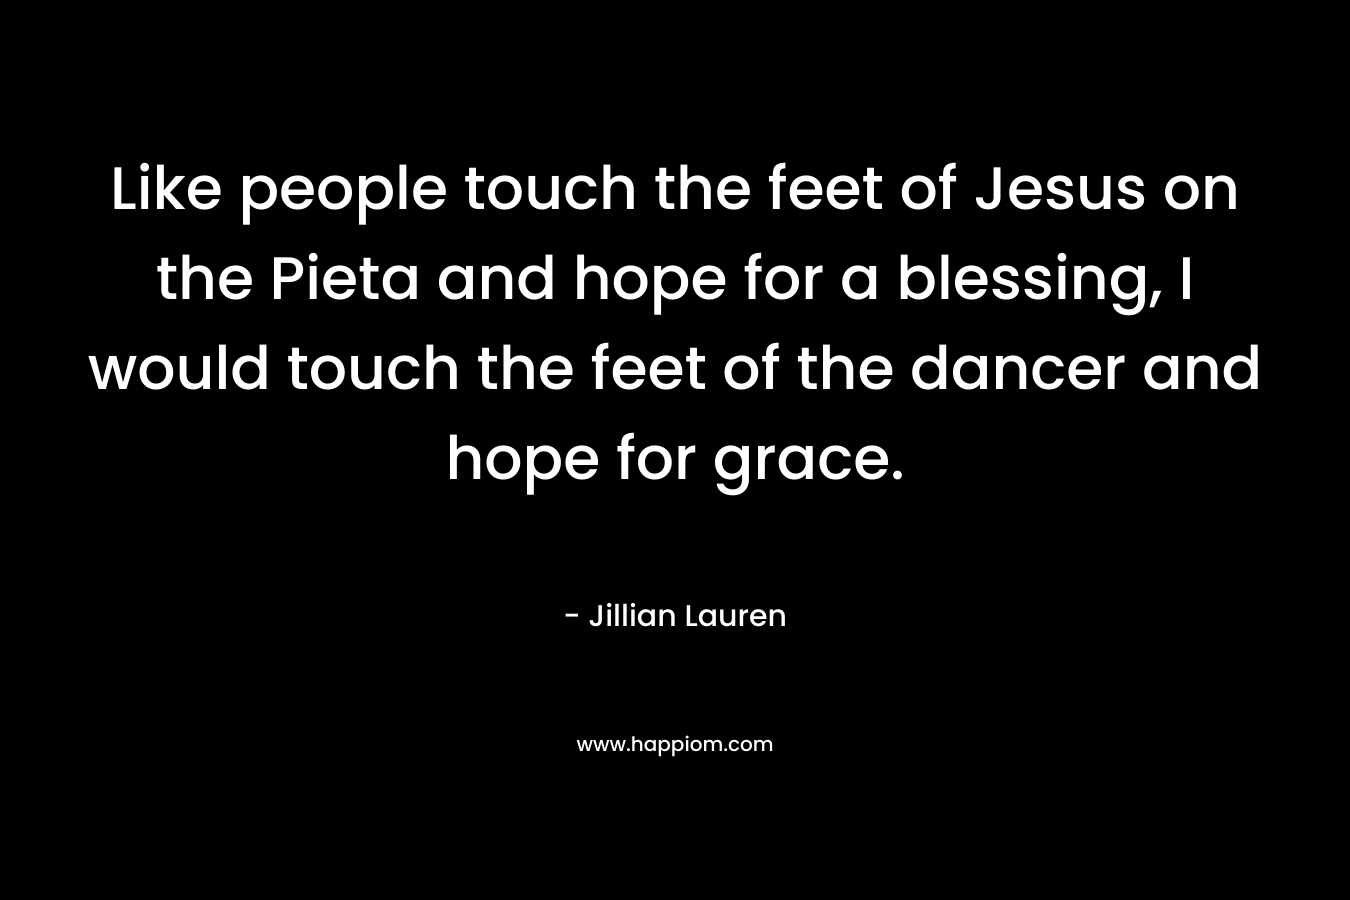 Like people touch the feet of Jesus on the Pieta and hope for a blessing, I would touch the feet of the dancer and hope for grace.